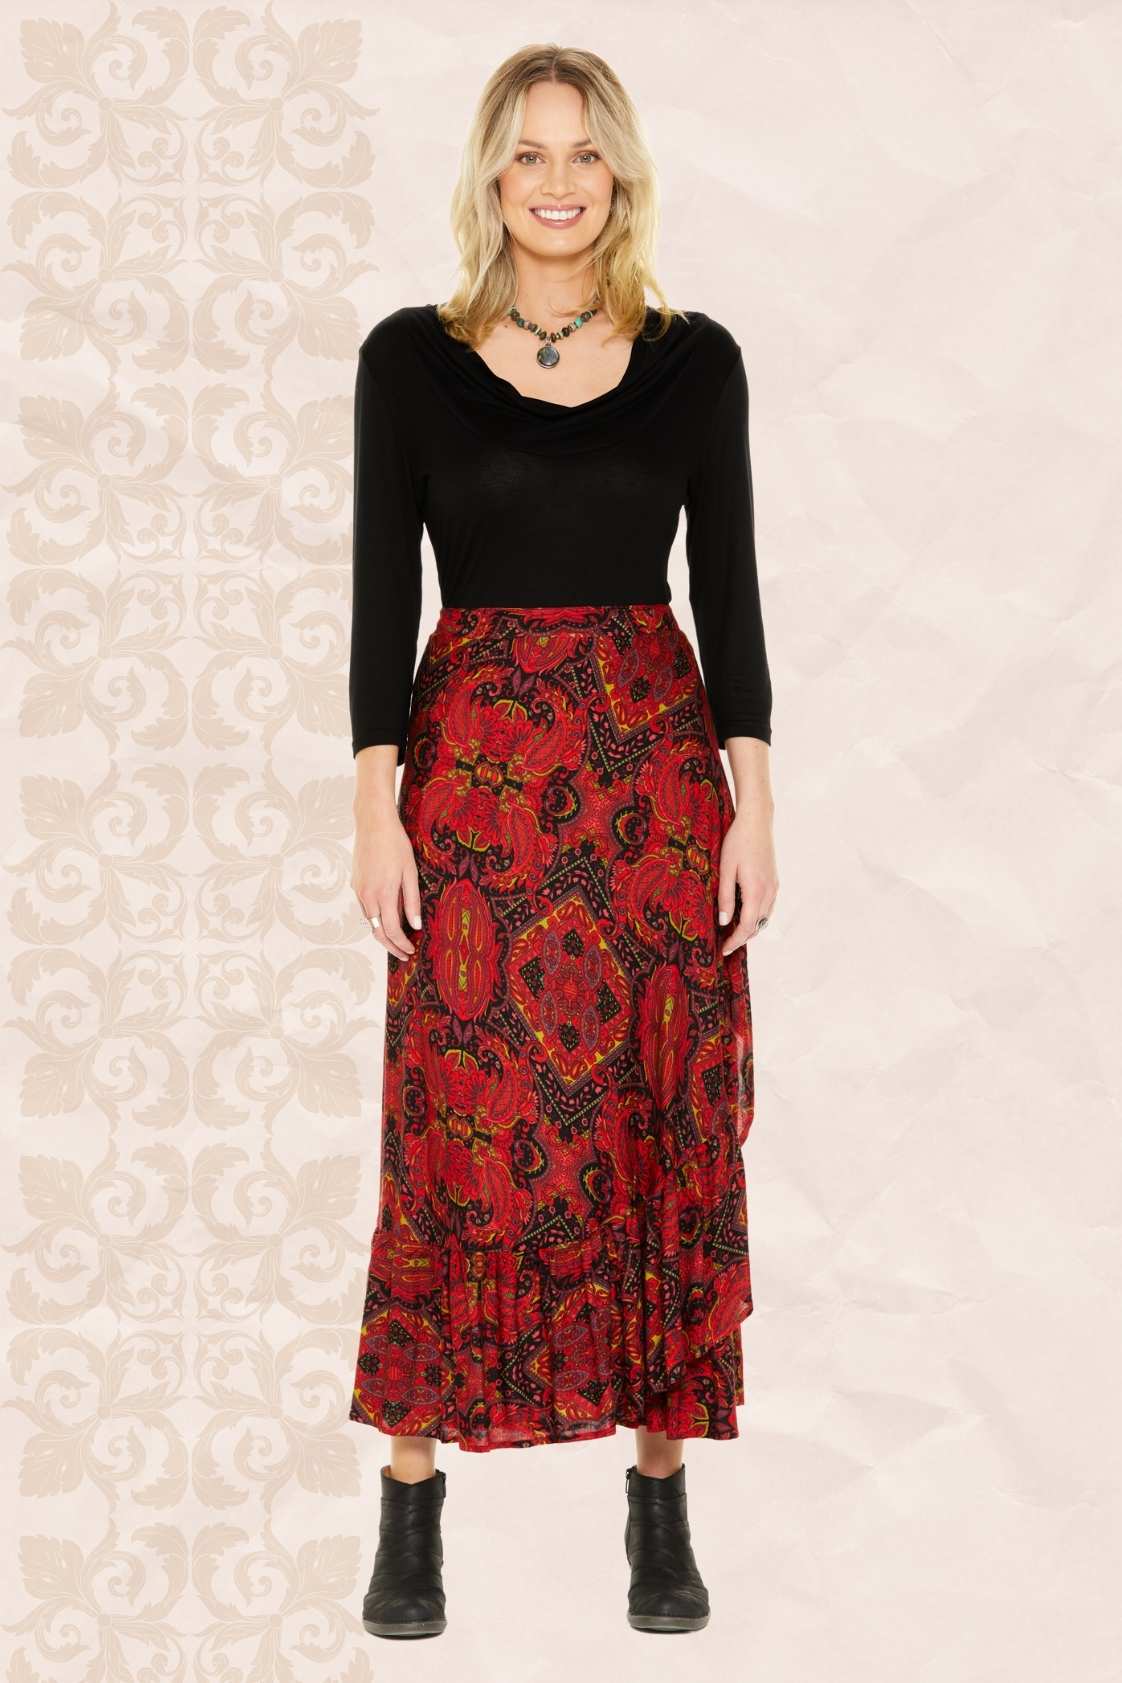 Ole Maxi Wrap Frill Skirt in Claret Print